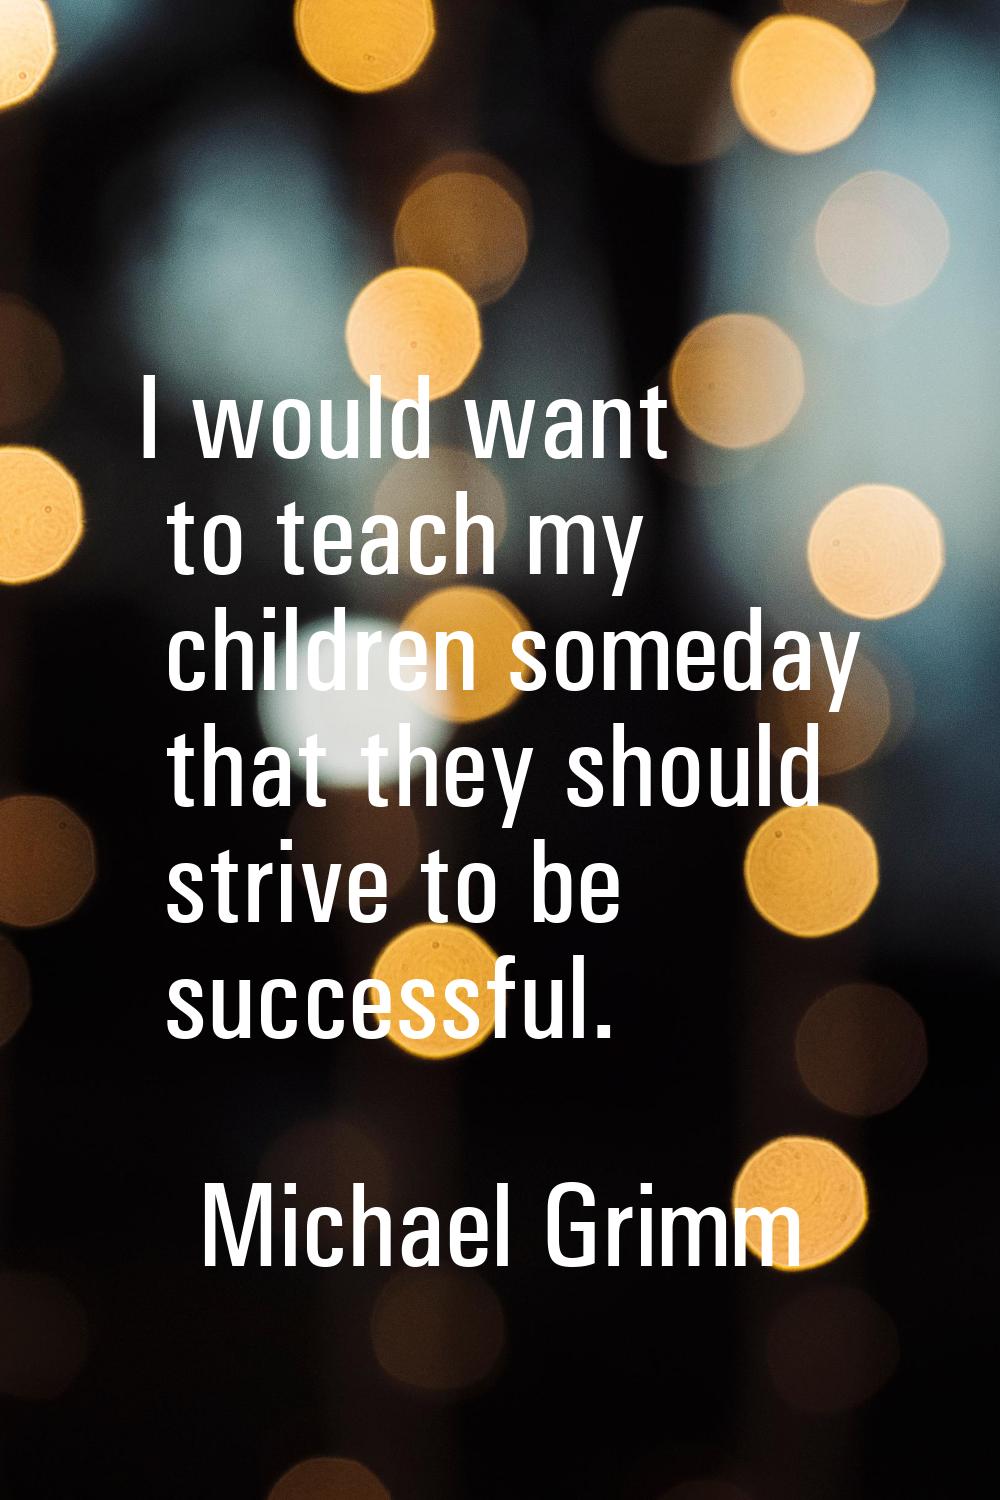 I would want to teach my children someday that they should strive to be successful.